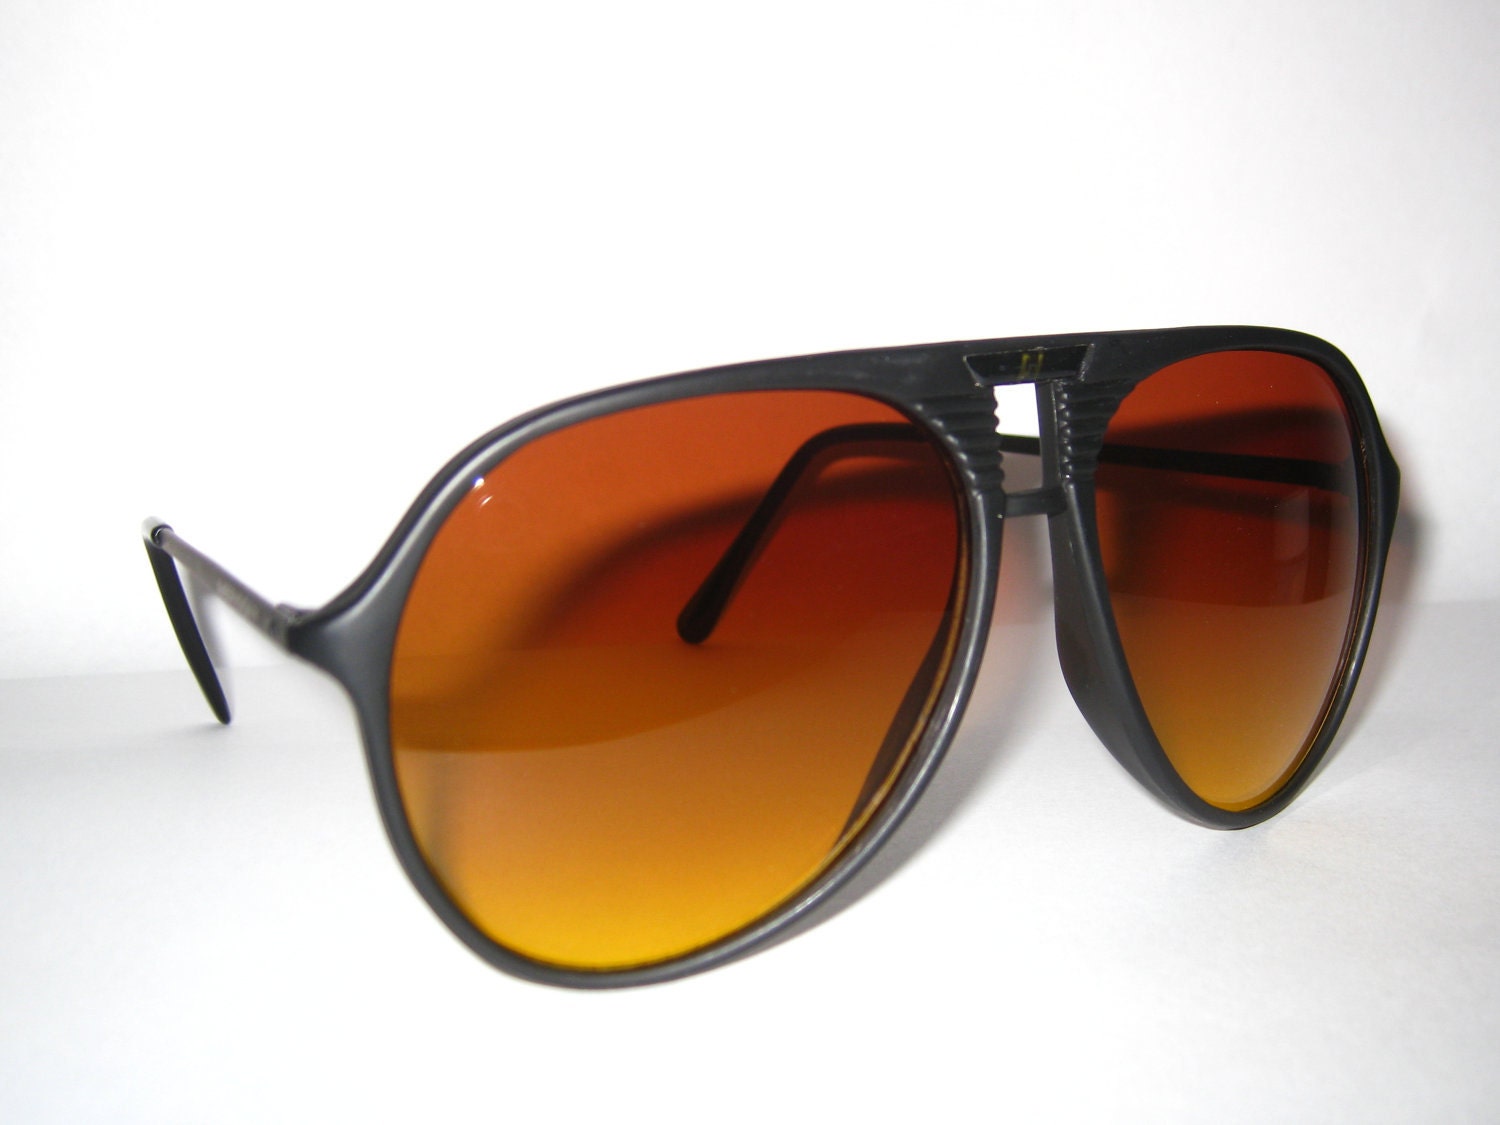 Vintage Ambervision Sunglasses By Bootsmagee On Etsy